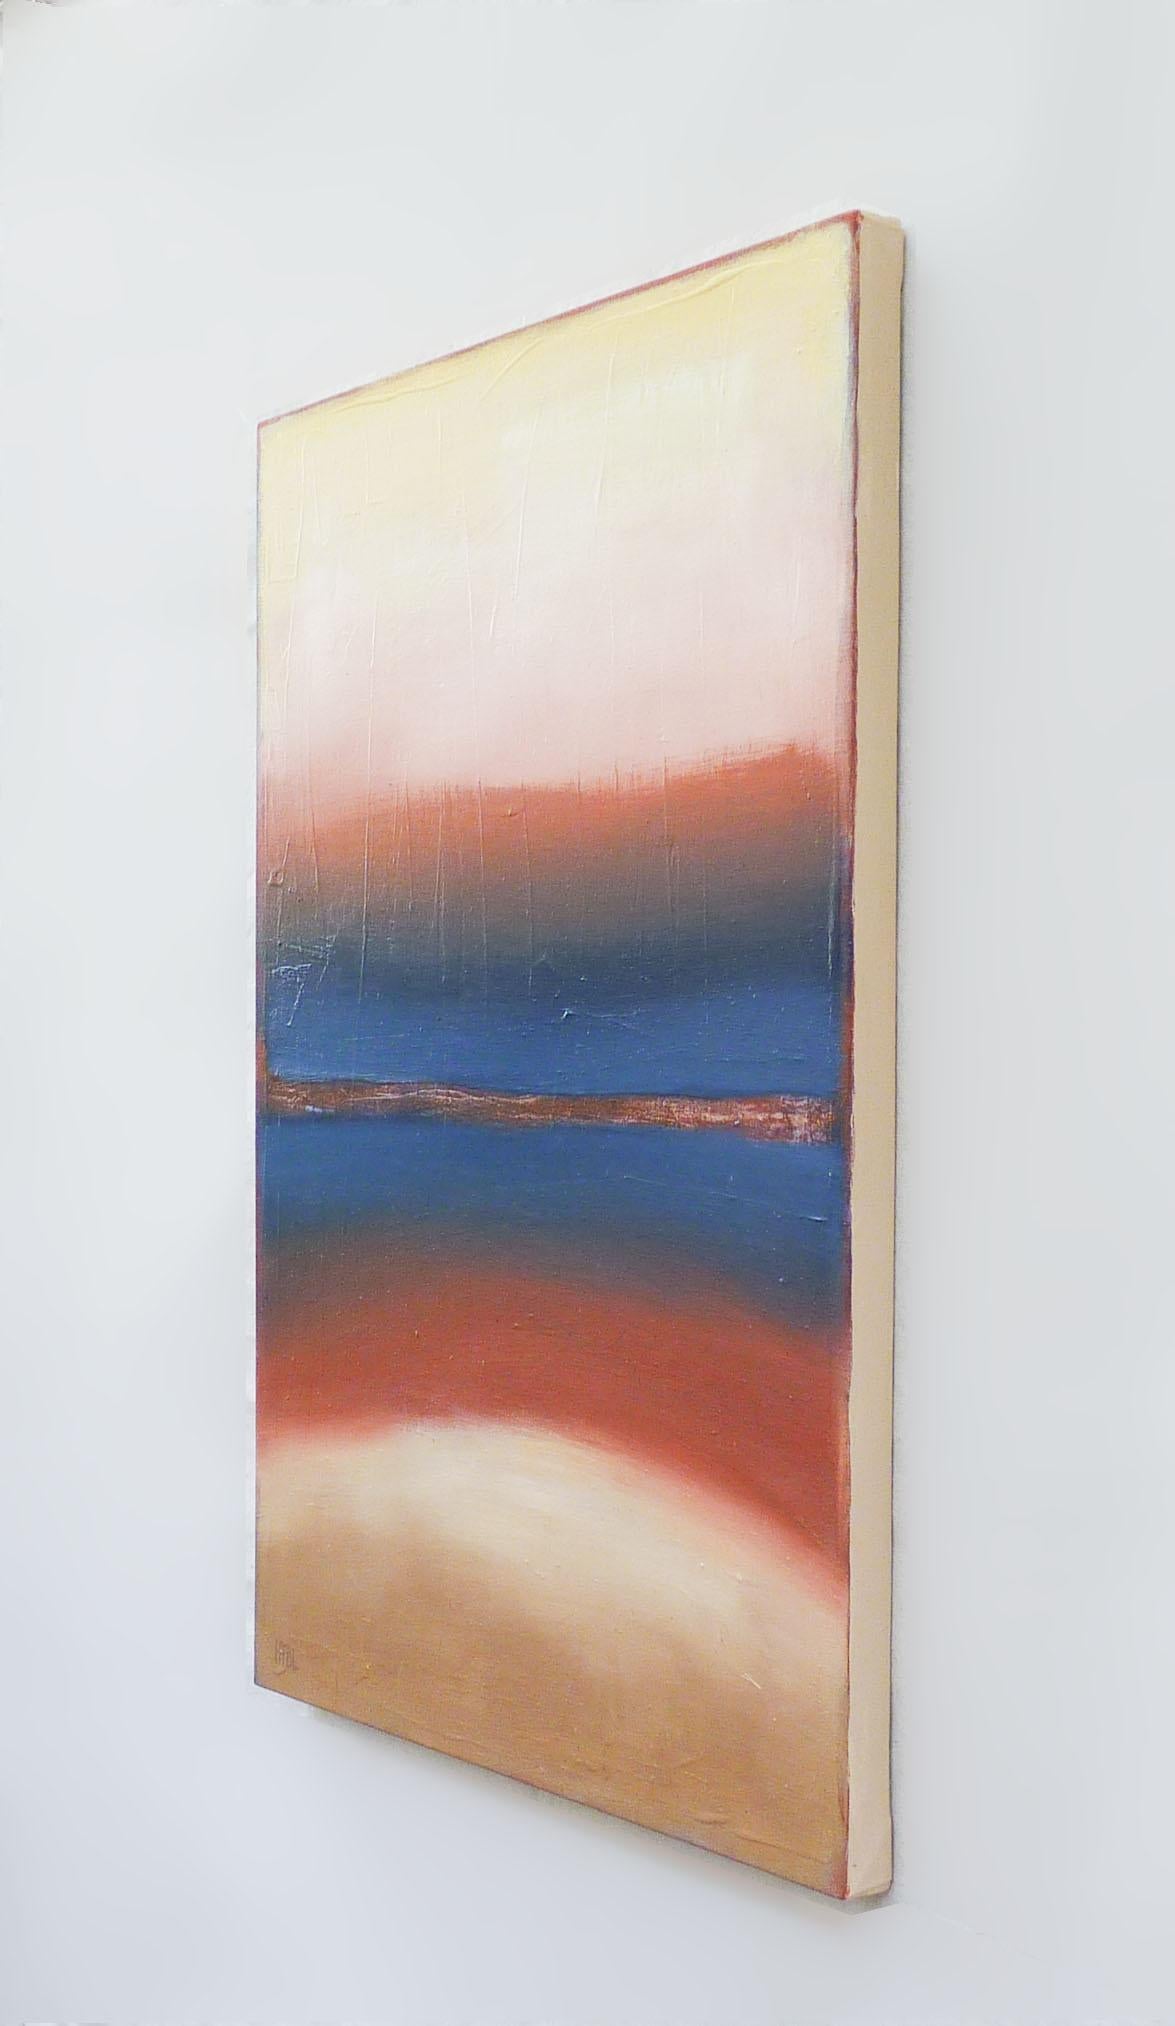 <p>Artist Comments<br>Depicting the Big Sur Coast of California into abstraction, an ethereal vista unfolds with the symphony of the blue sea, red horizon, and orange sky. Its less representational nature adds to its allure, evoking an emotional